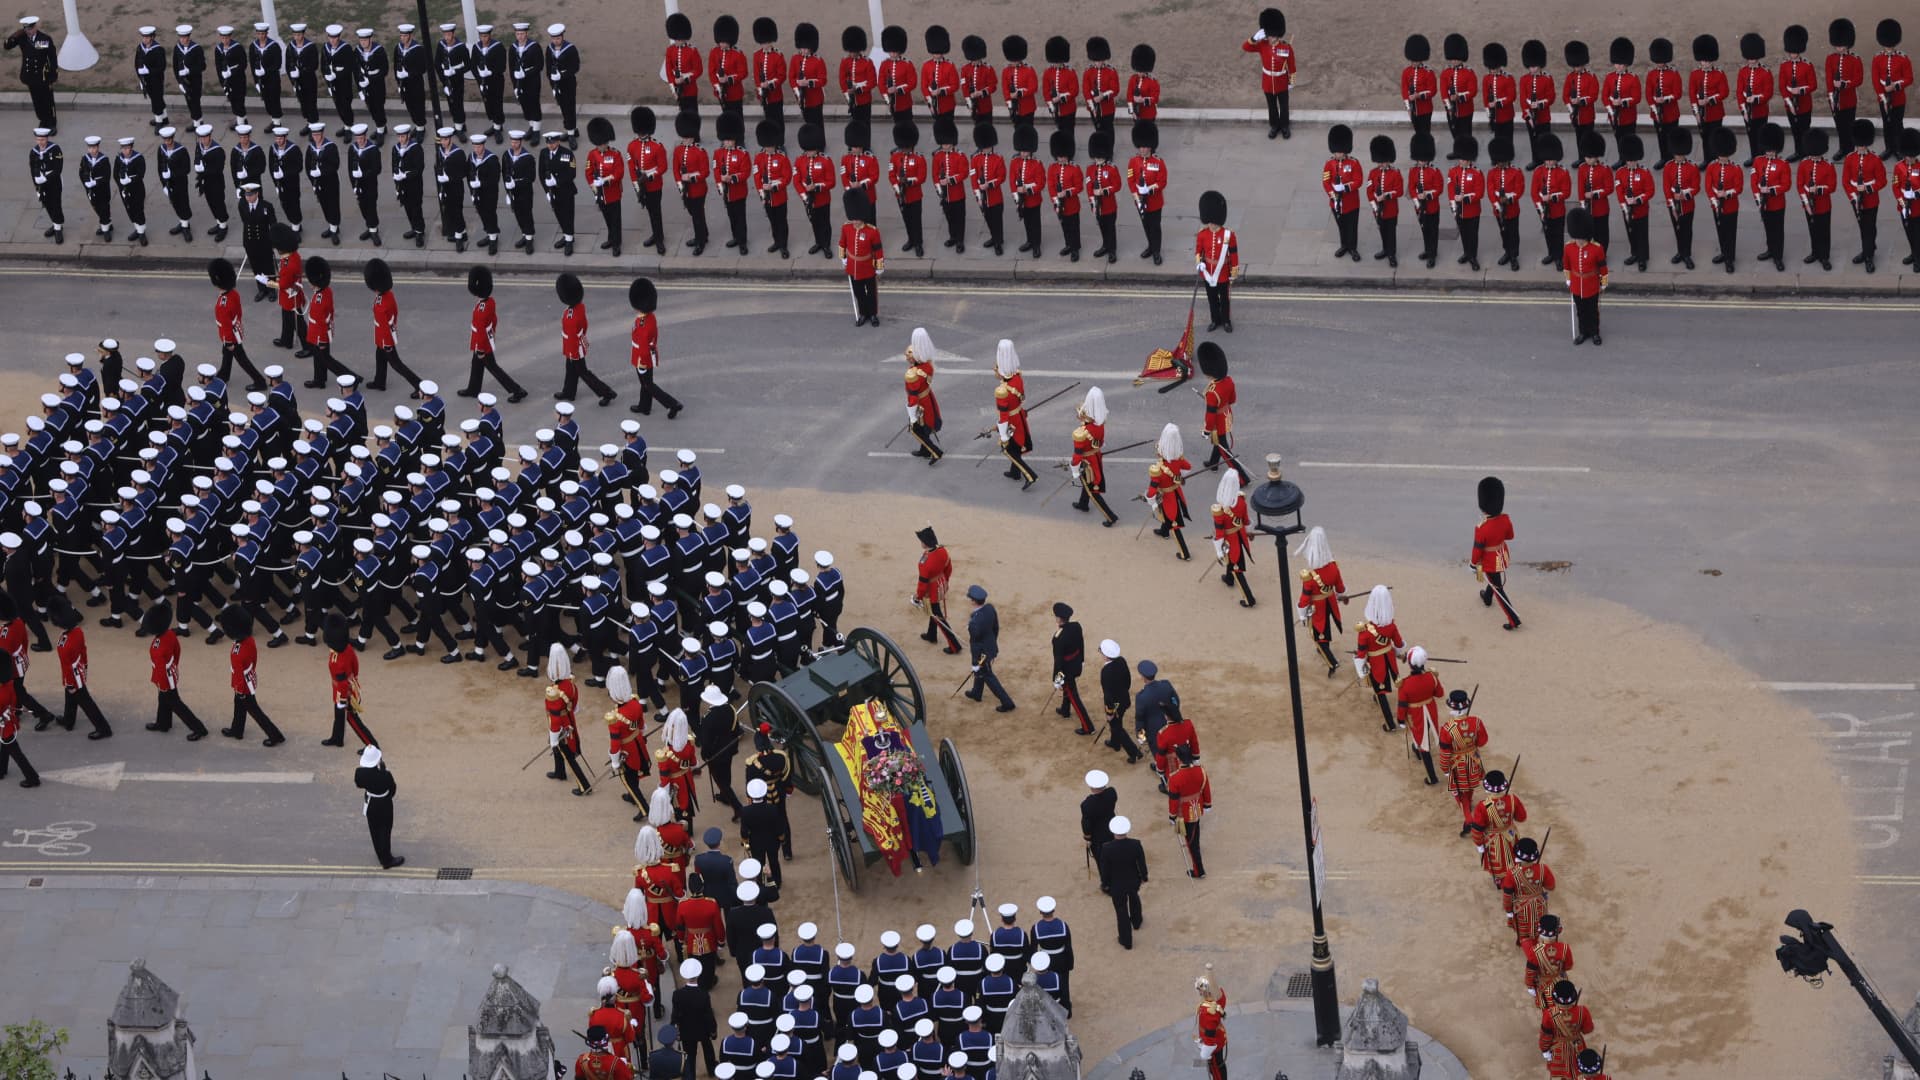 The UK Armed Forces have played a part in the procession for Her Majesty The Queen's funeral and committal service today, in London and Windsor.